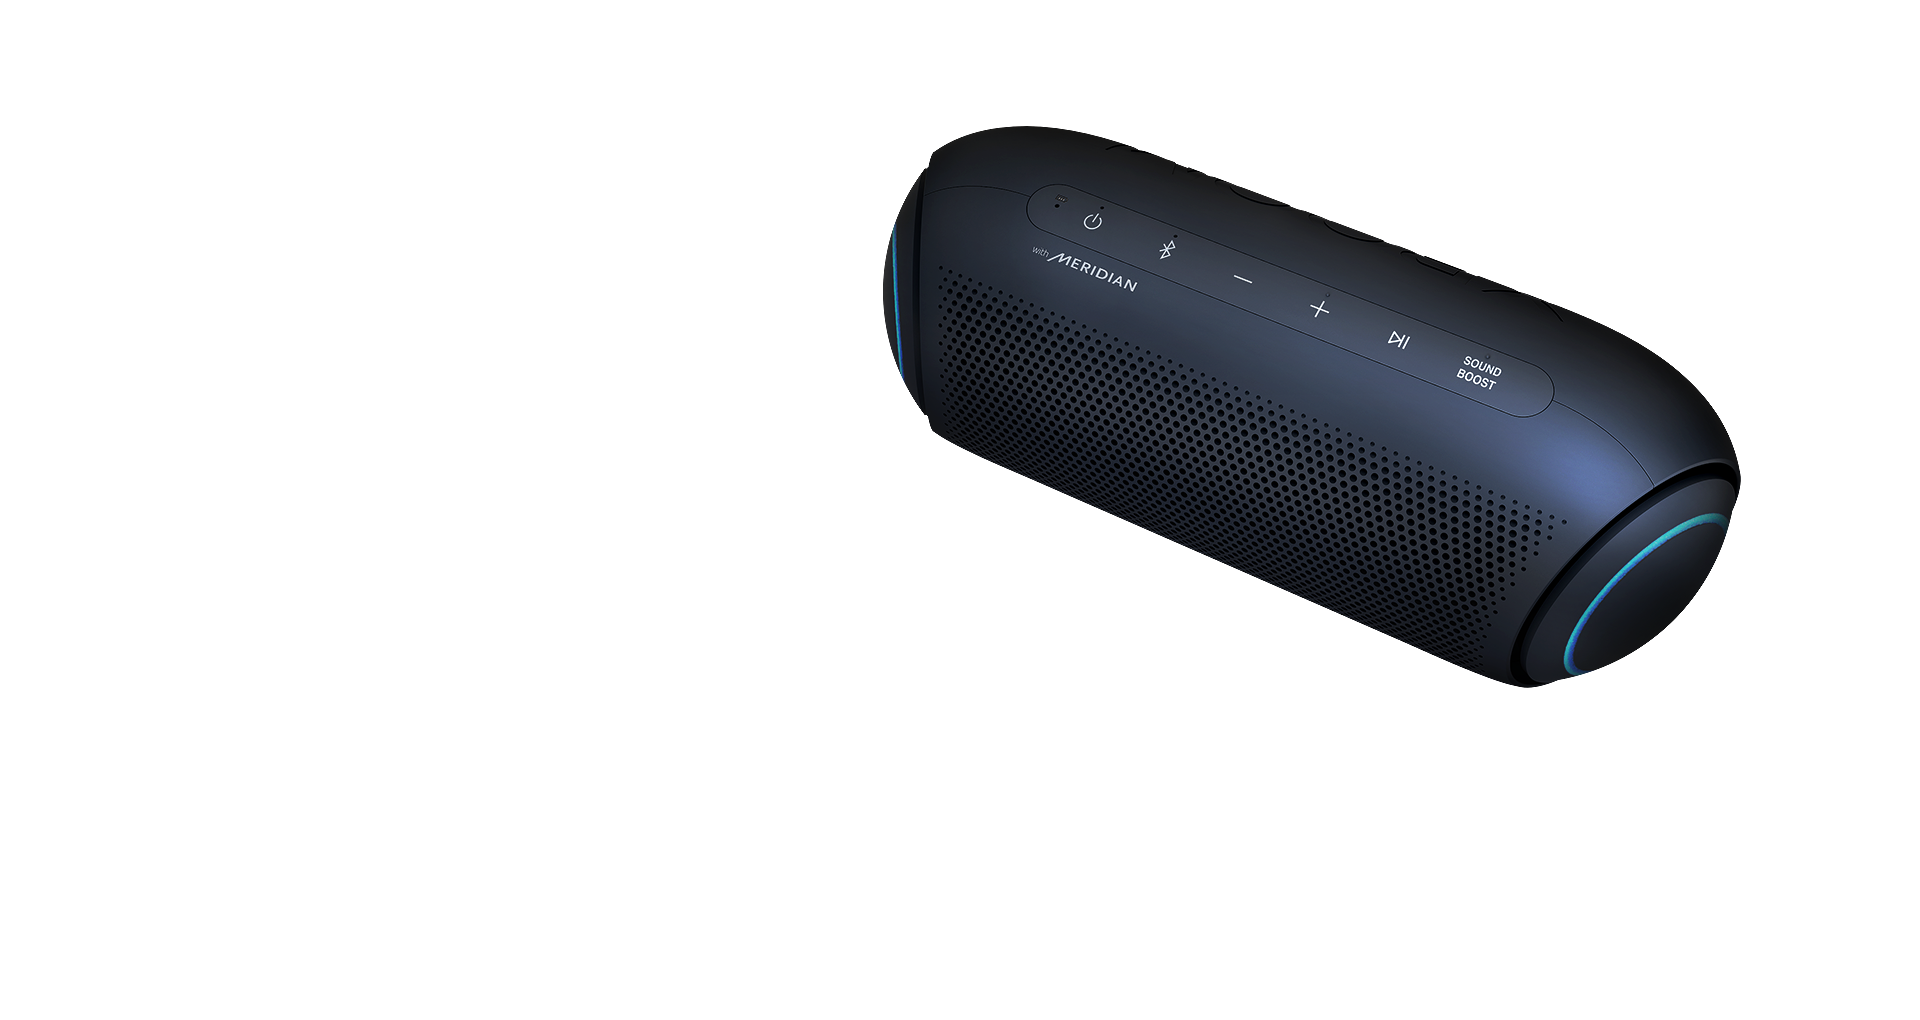 An LG XBOOM Go PL7 with sky-blue lighting against a black background has a ripple effect below it to represent sound waves.